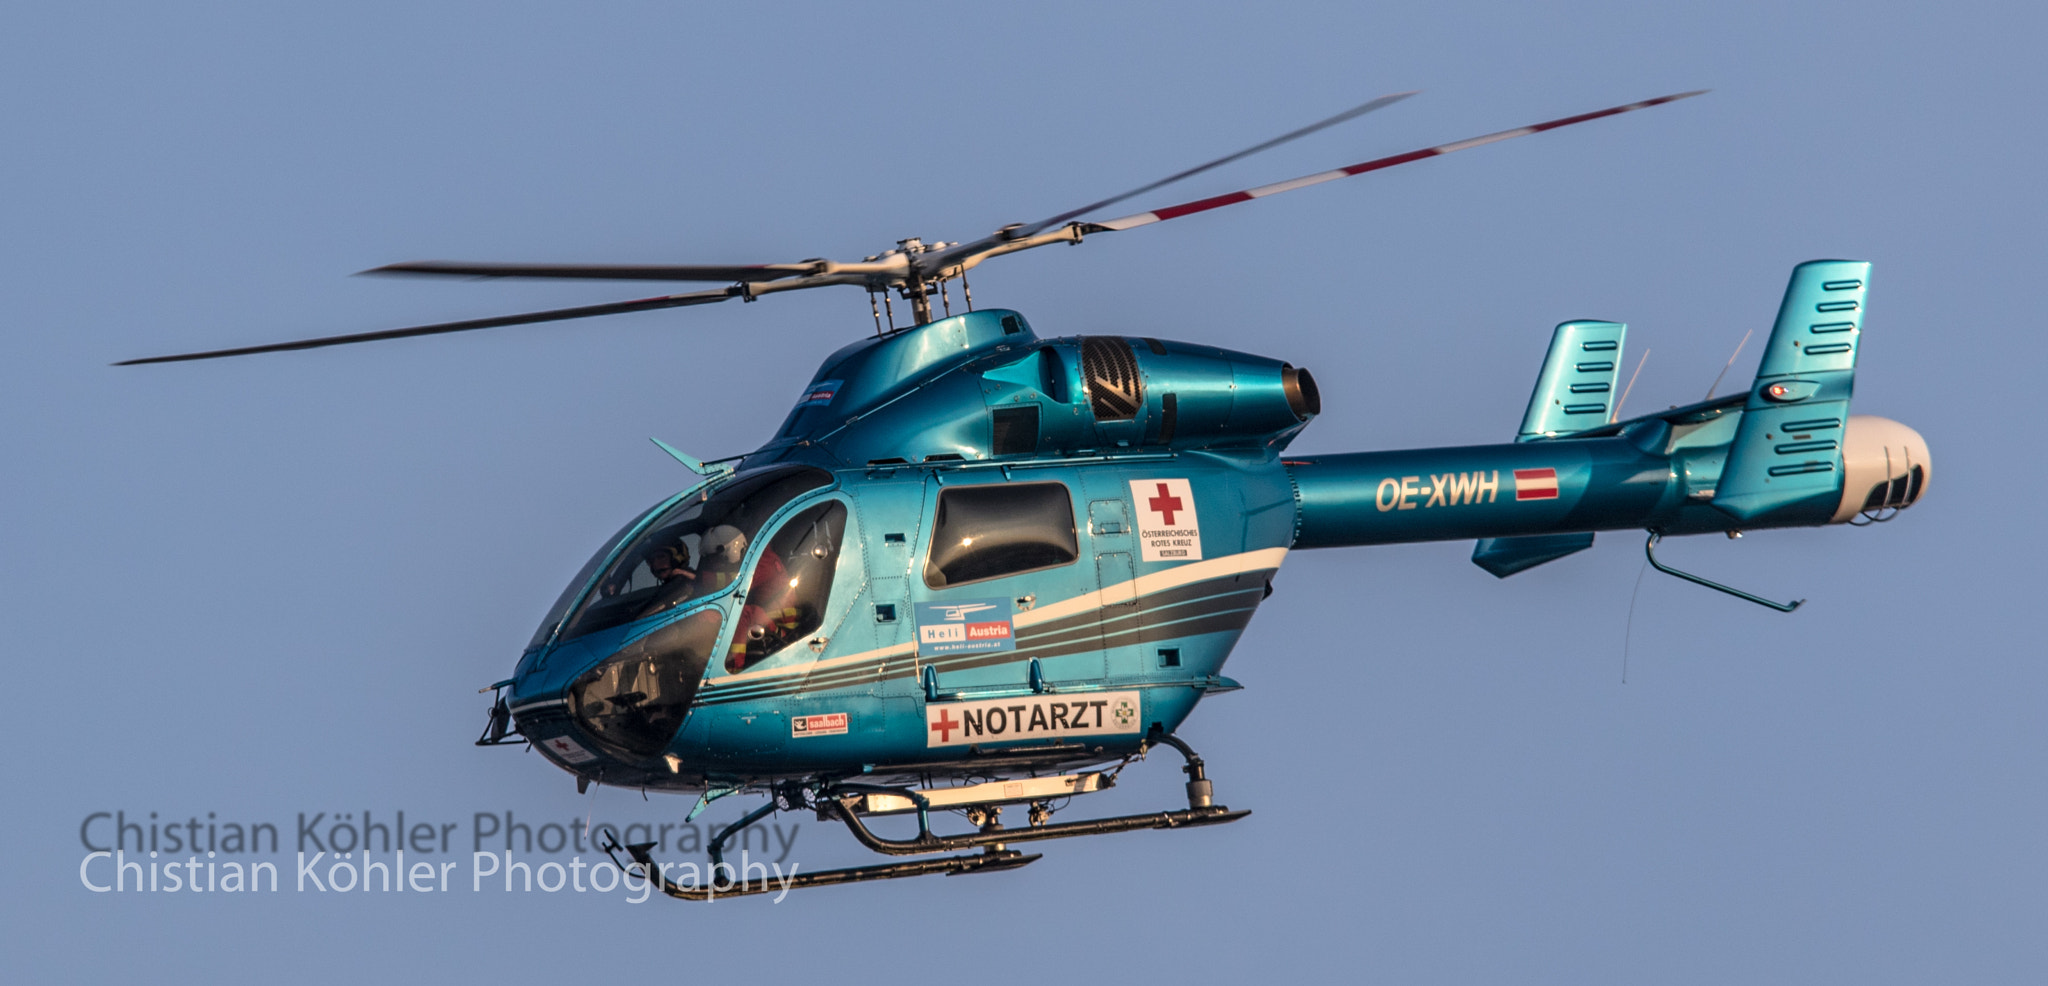 Canon EOS 7D Mark II + Sigma 70-200mm F2.8 EX DG OS HSM sample photo. Oe-xwh / md 902 explorer / knaus helicopter photography